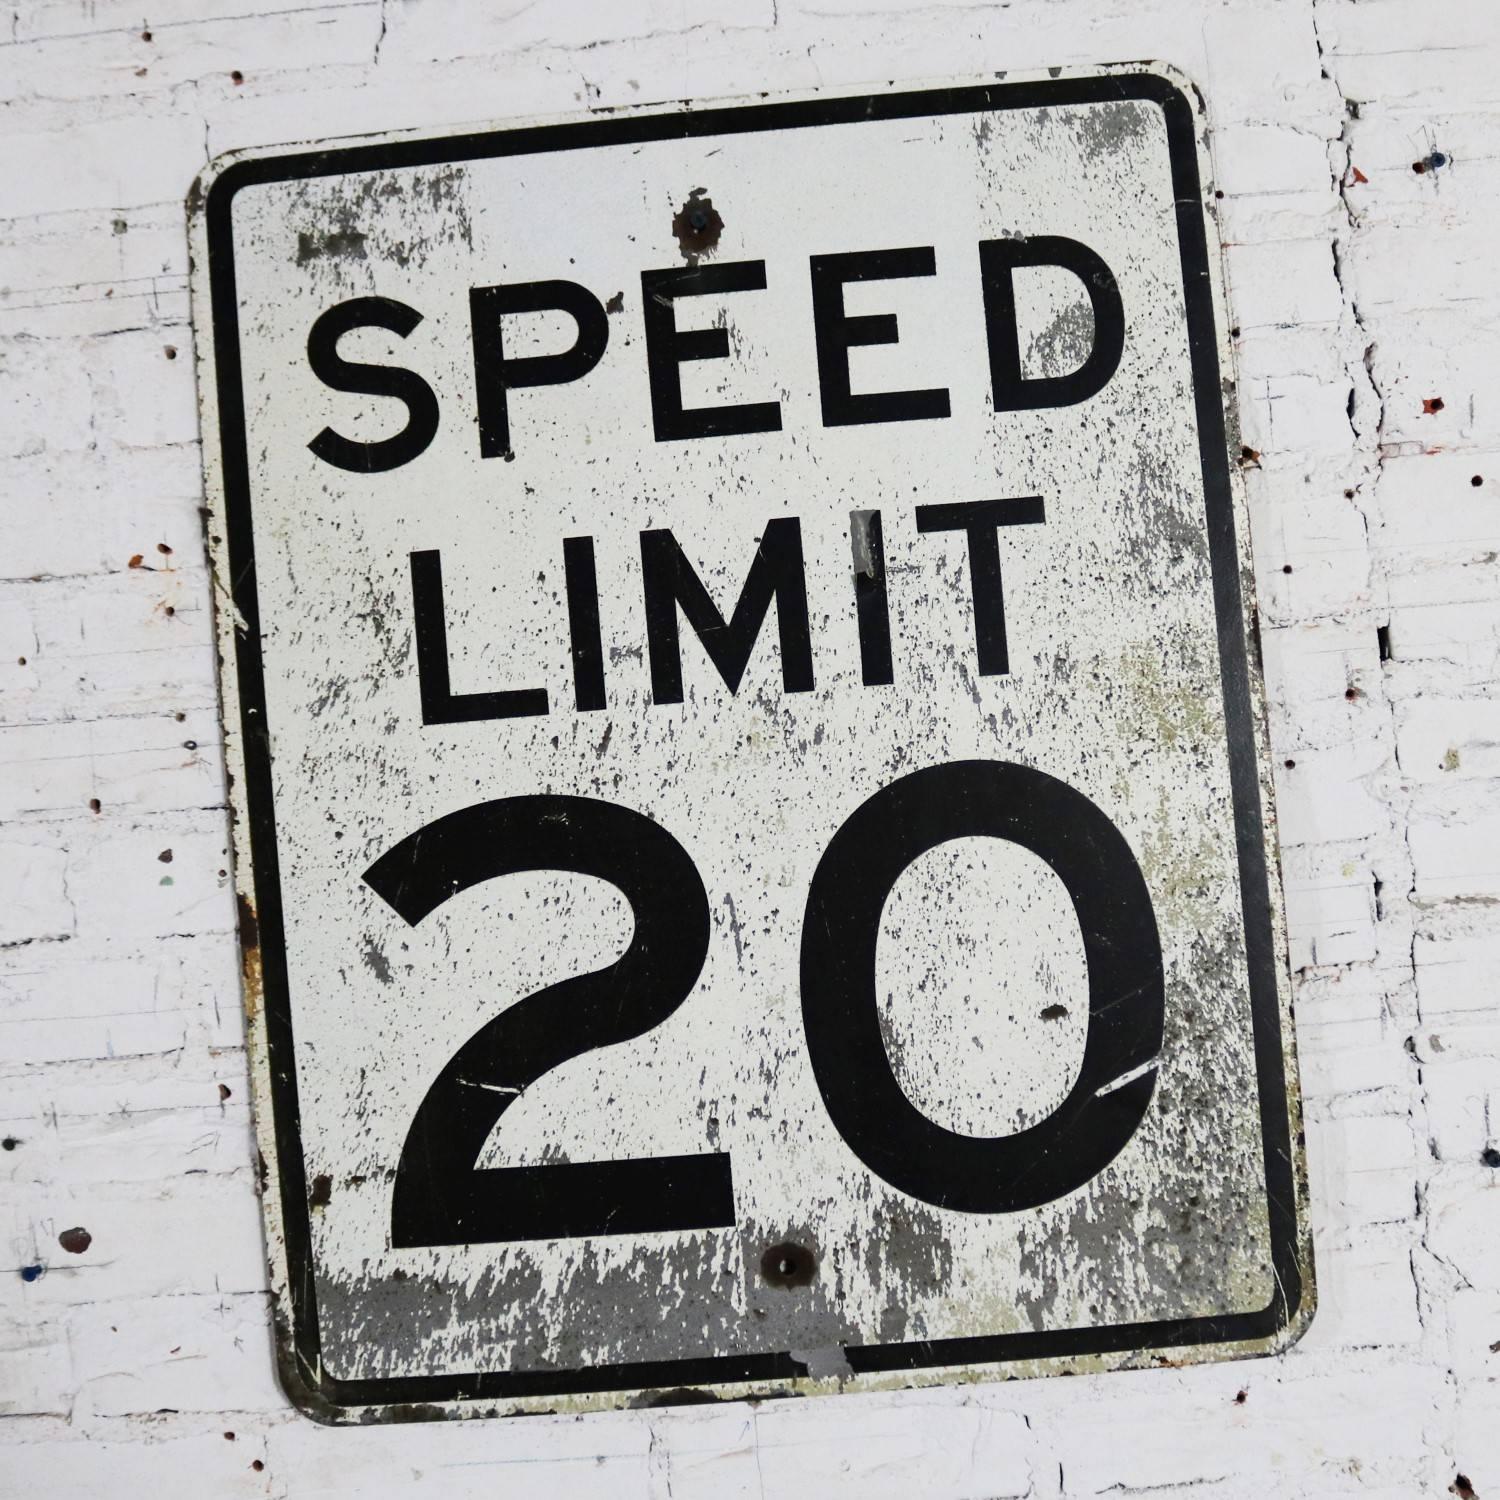 Fun Speed Limit 20 vintage steel traffic sign. It is large and in awesome vintage condition with just the right amount of age and use patina. Please see photos, circa 20th century.

I can’t drive 55! Or at least you shouldn’t because here the